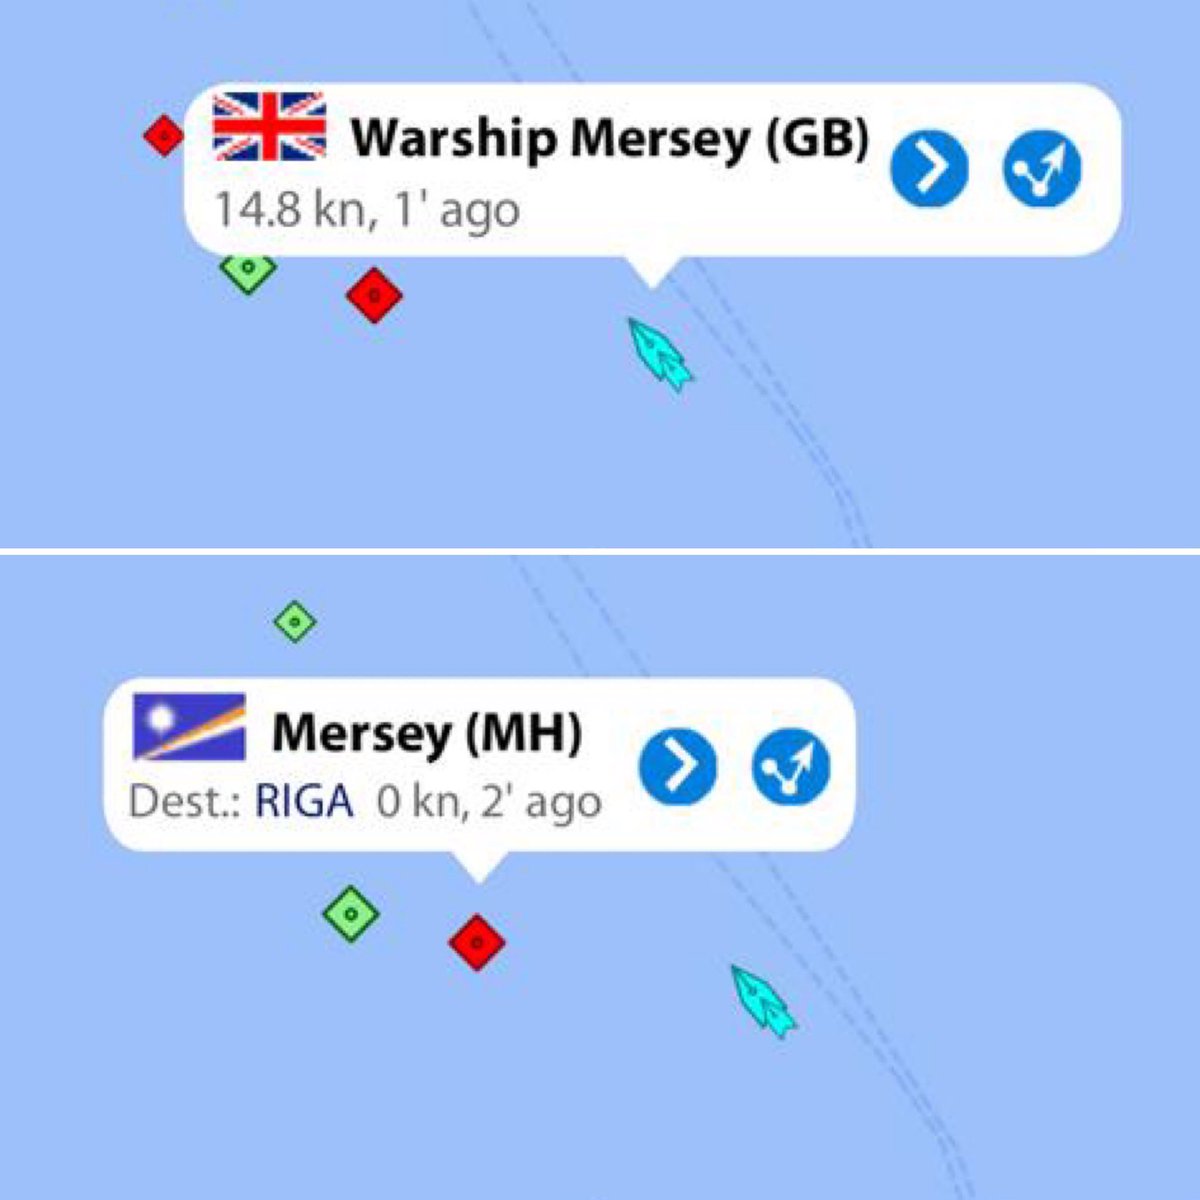 After sailing from Latvia, HMS MERSEY conducted a PASSEX with the Latvian Navy Patrol Ship JELGAVA #JEF #StrongerTogether 

On the way out of Riga, we also sailed past the tanker MERSEY 😎👋 #greatname